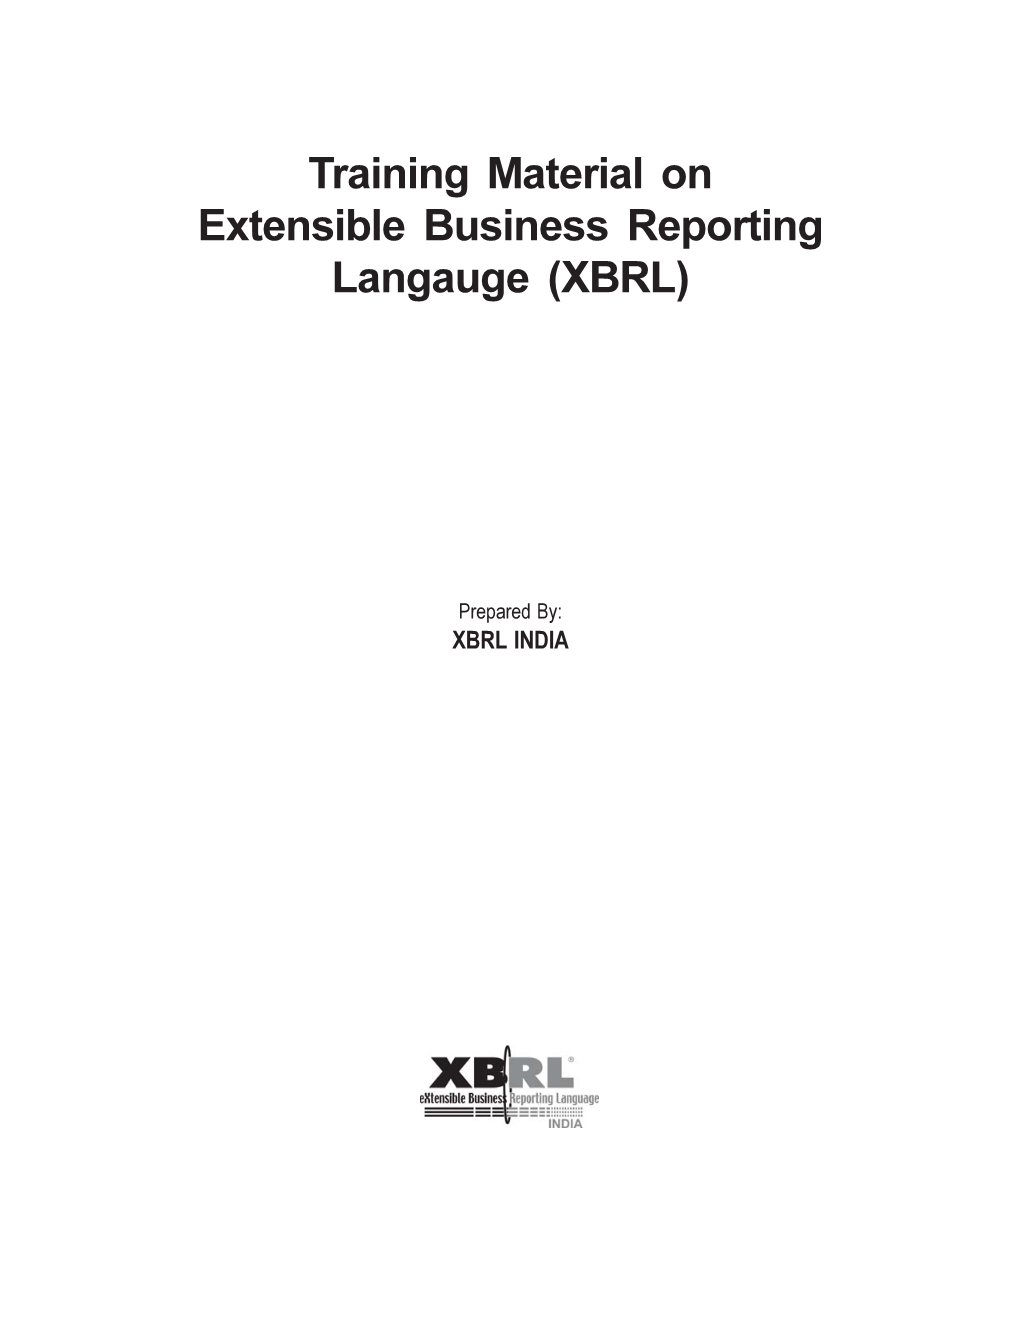 Training Material on Extensible Business Reporting Langauge (XBRL)